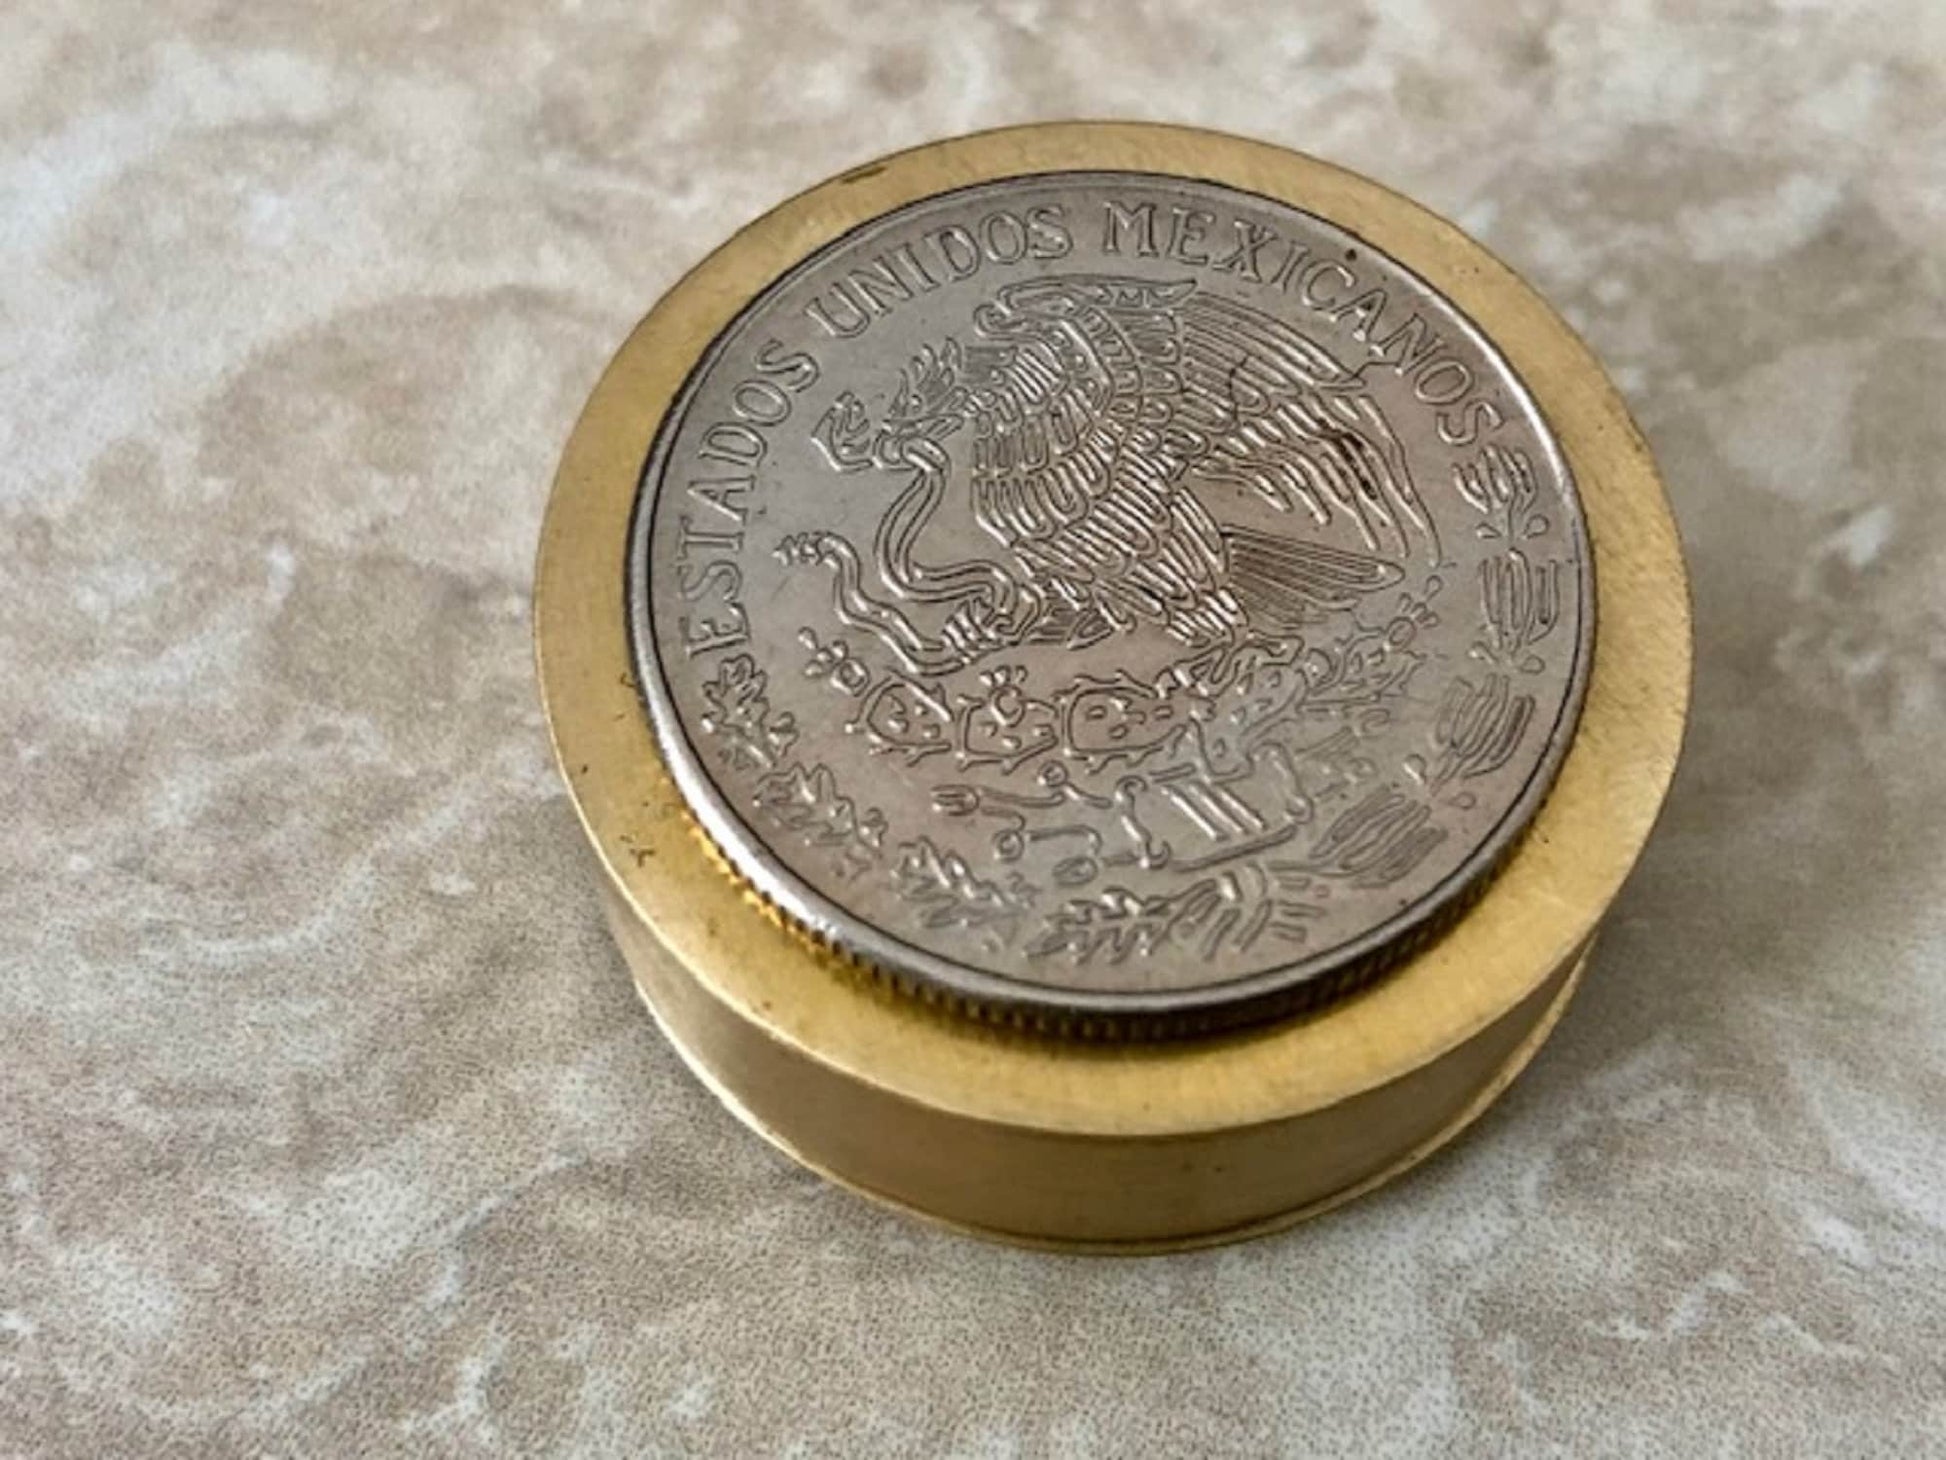 Mexico Coin Pillbox Mexican One Peso - Vintage Antique Stash Snuff Box, Tobacco Box, Keepsake, Men's Gift, Jewelry, World Coin Collector